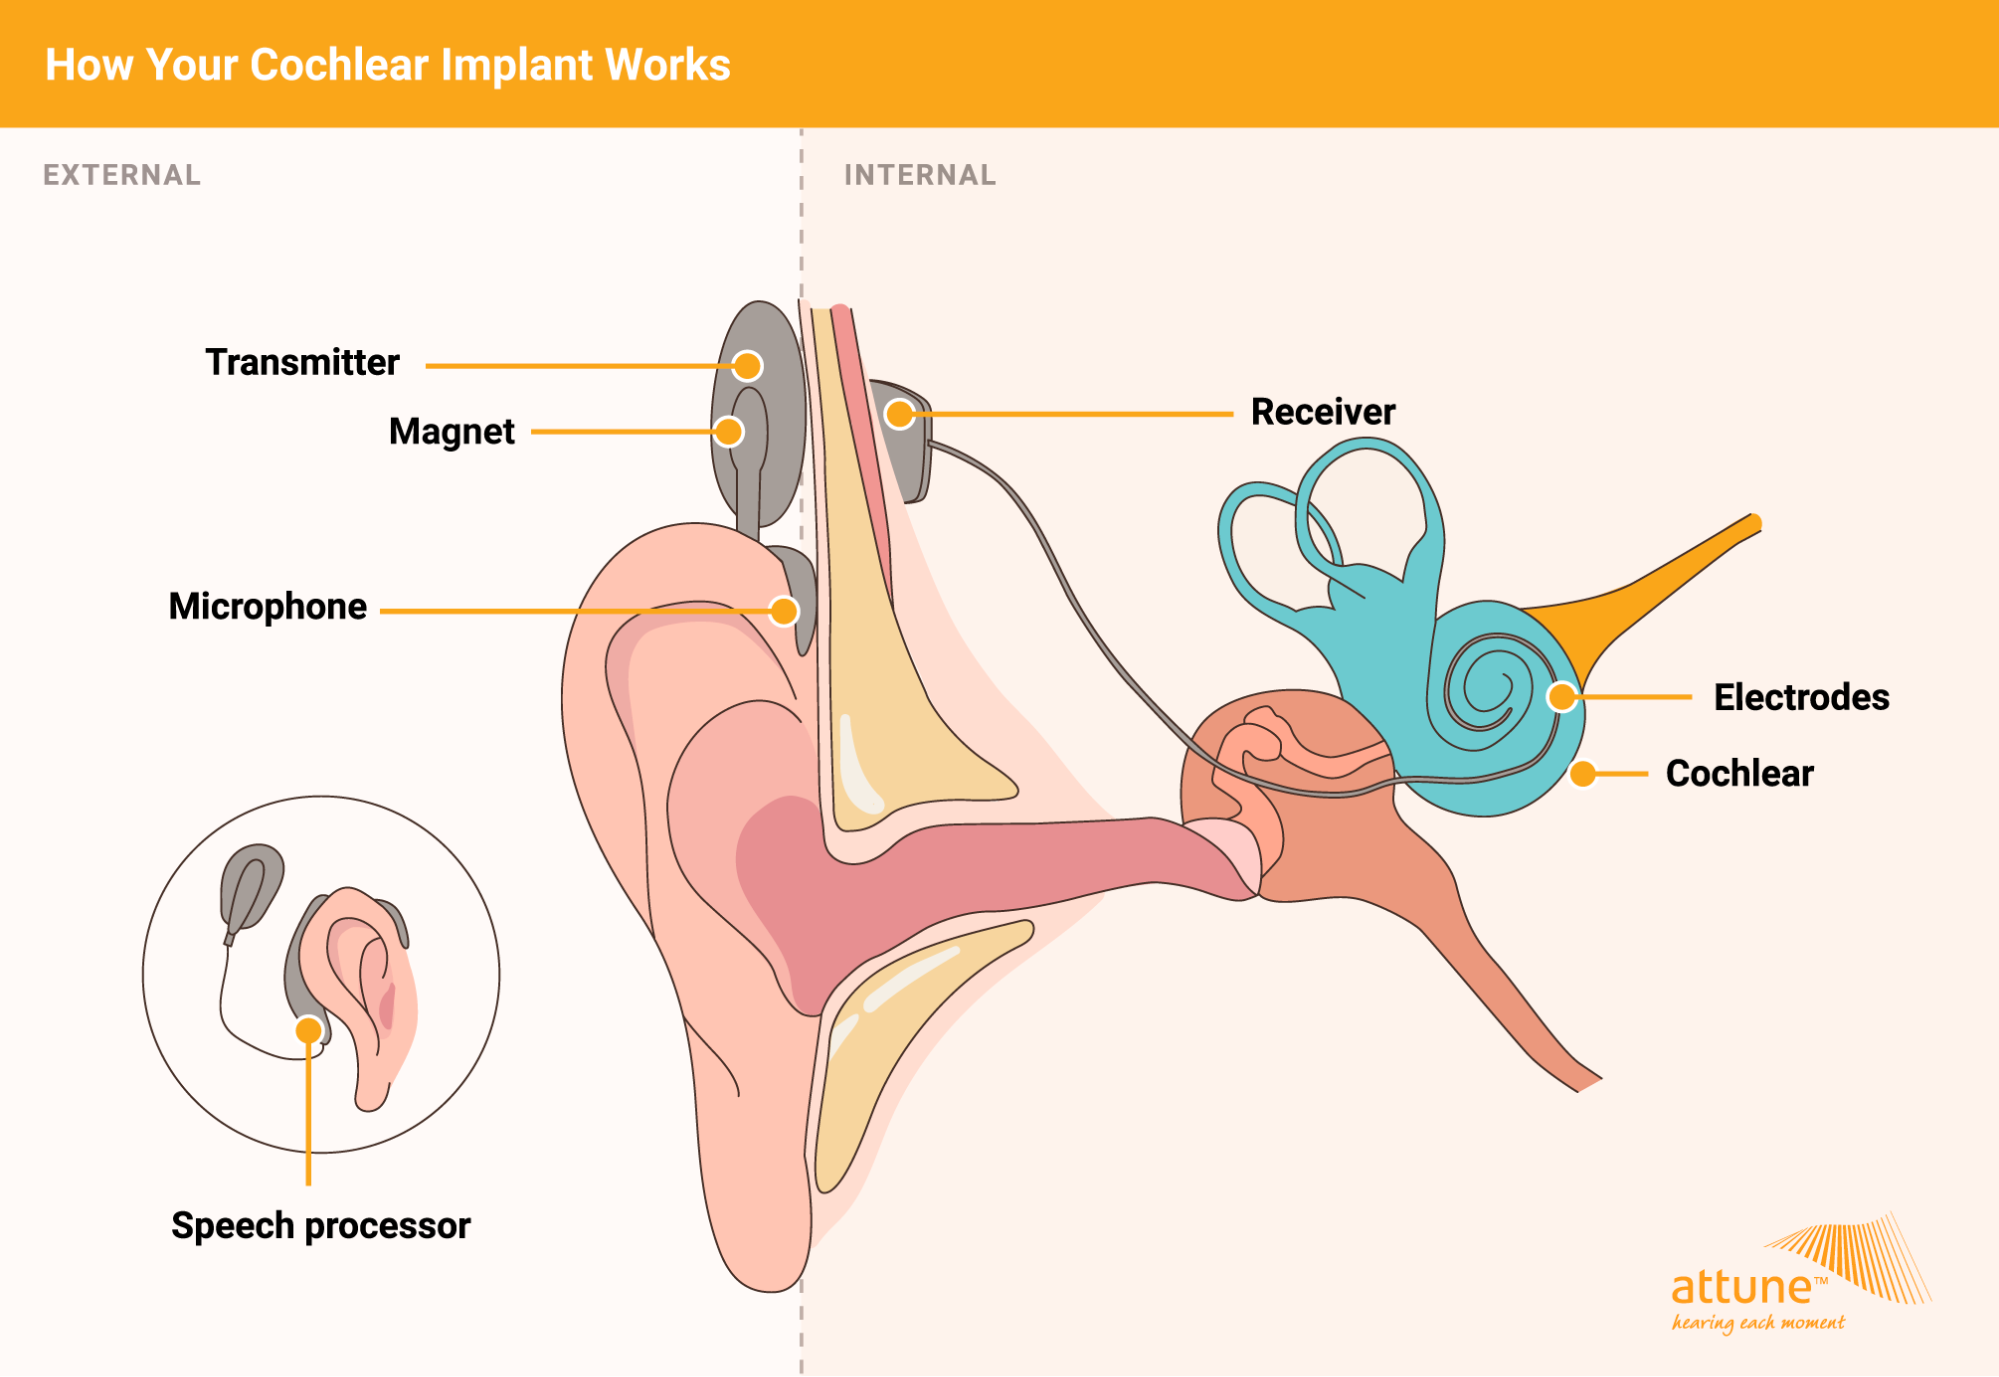 What are cochlear implants?